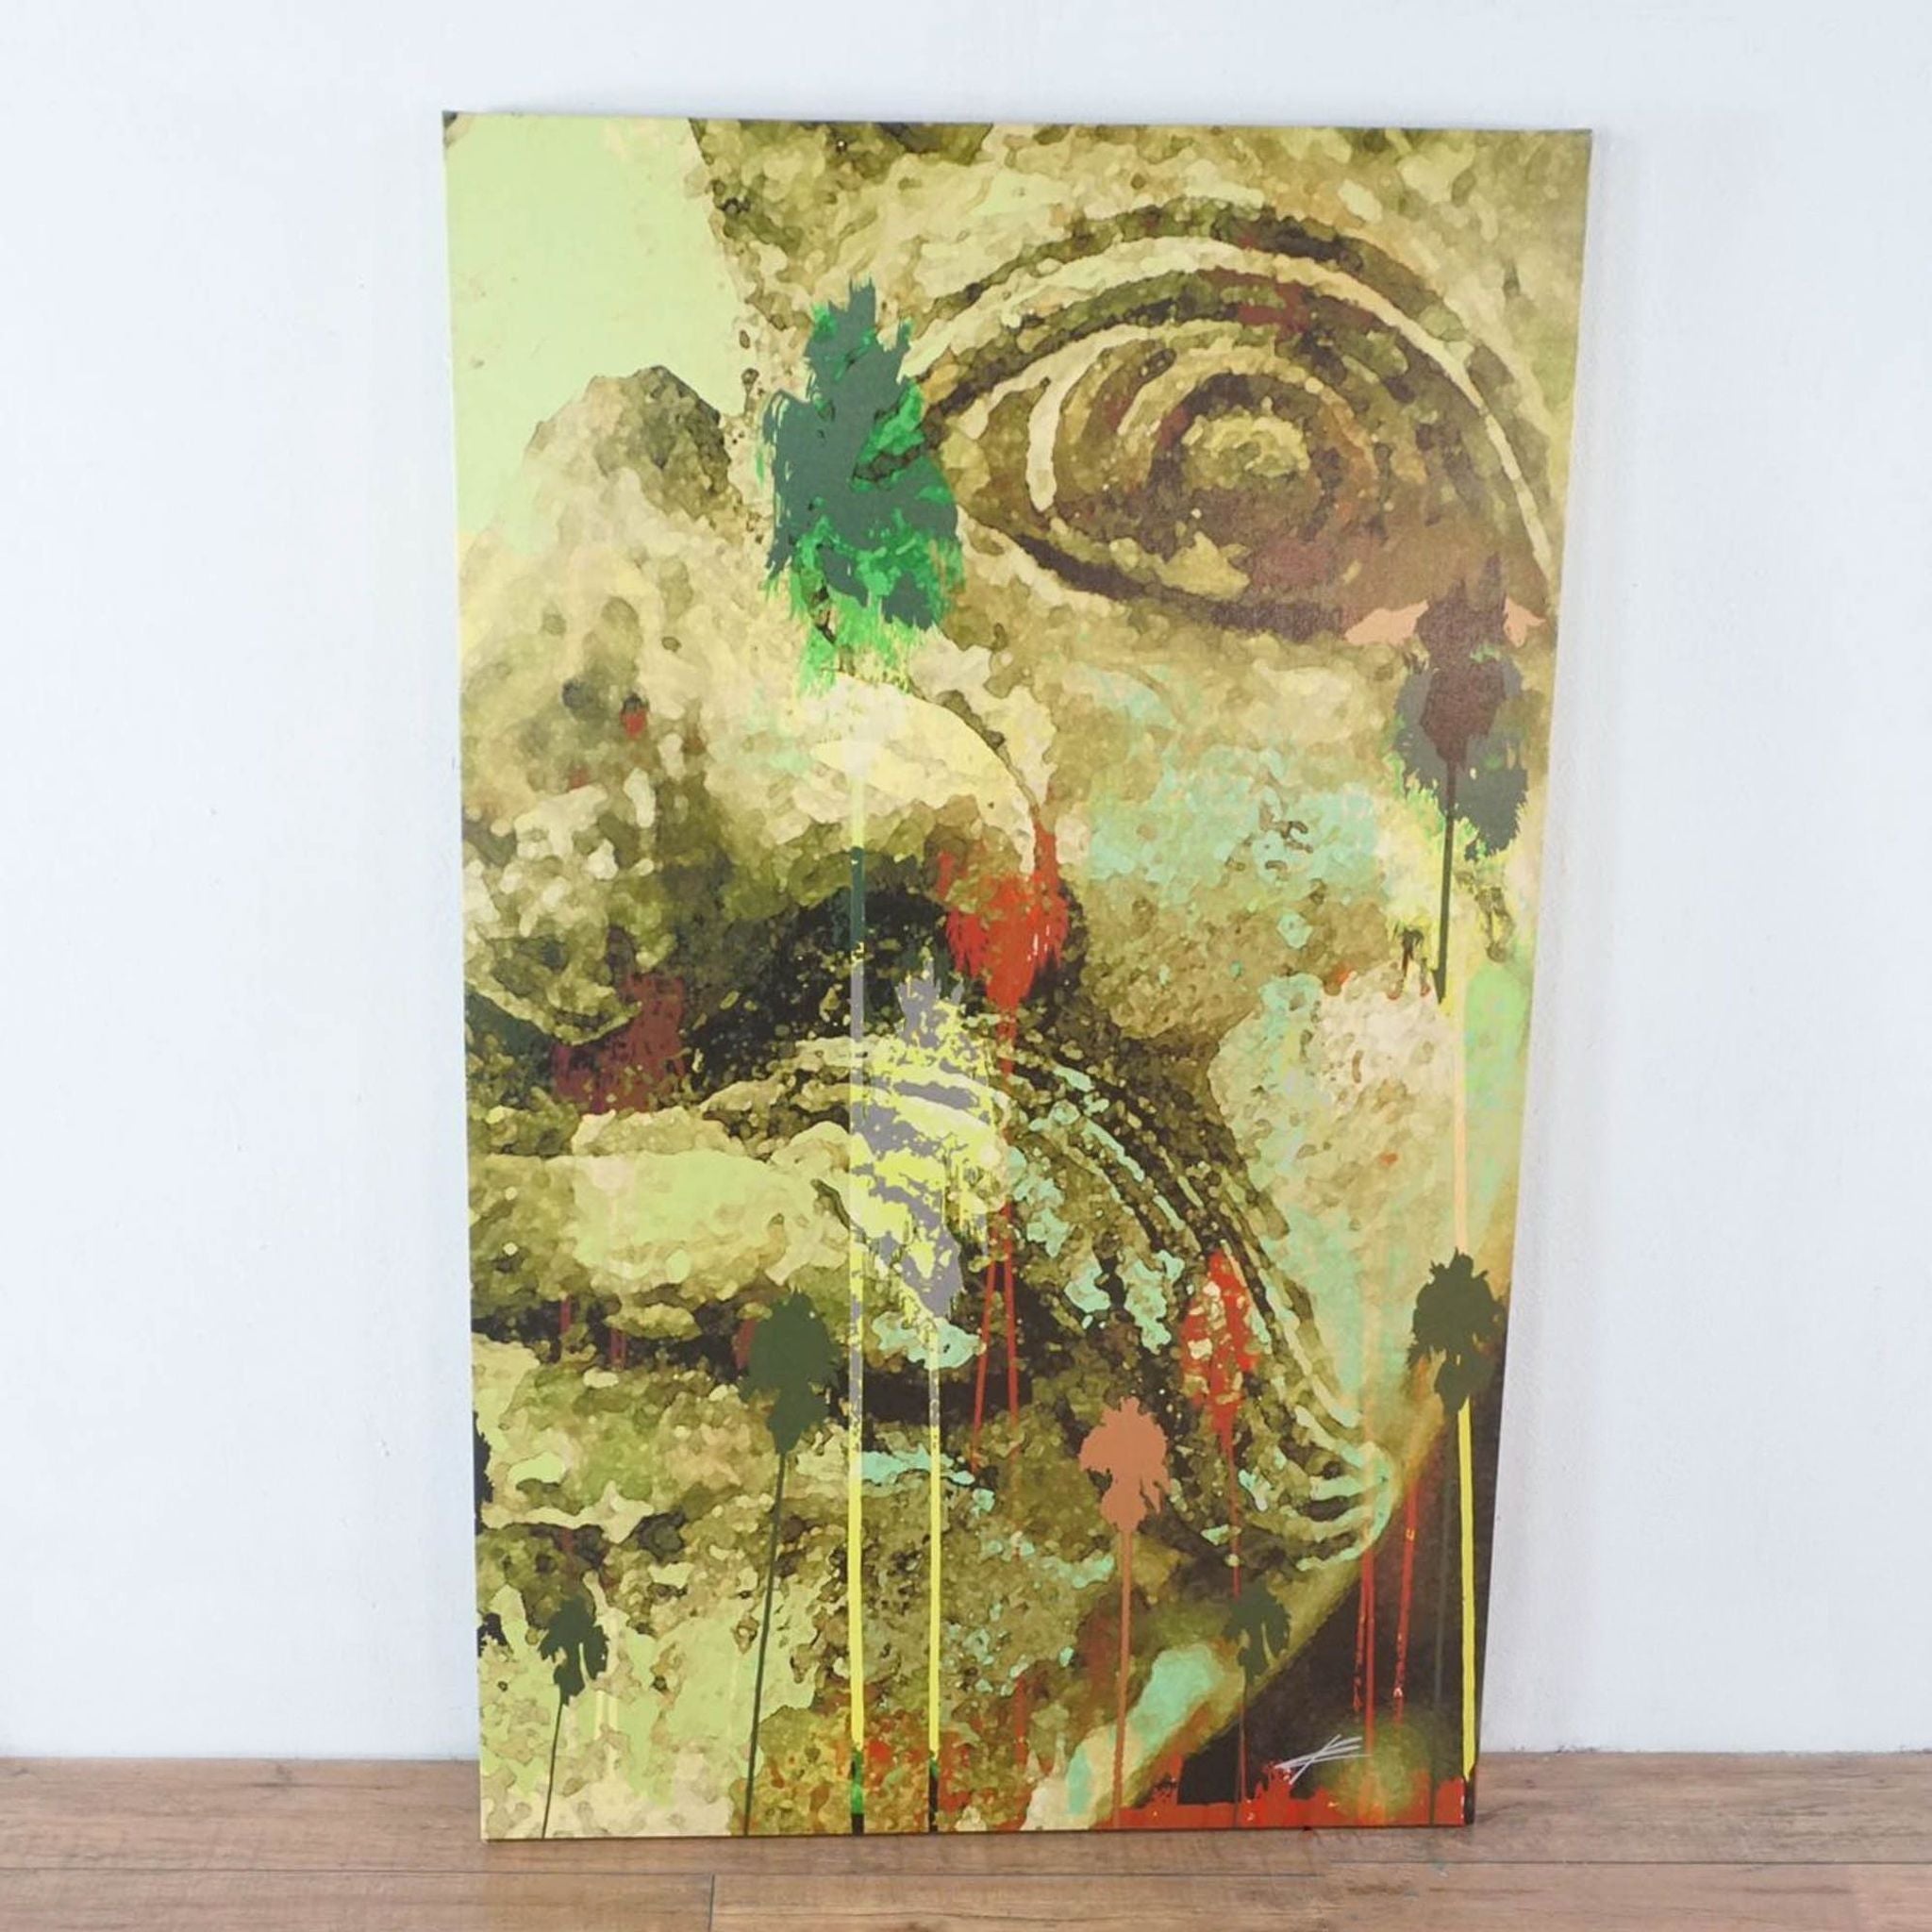 Abstract Asian-inspired giclee with green and red accents on a textured backdrop, Reperch brand.